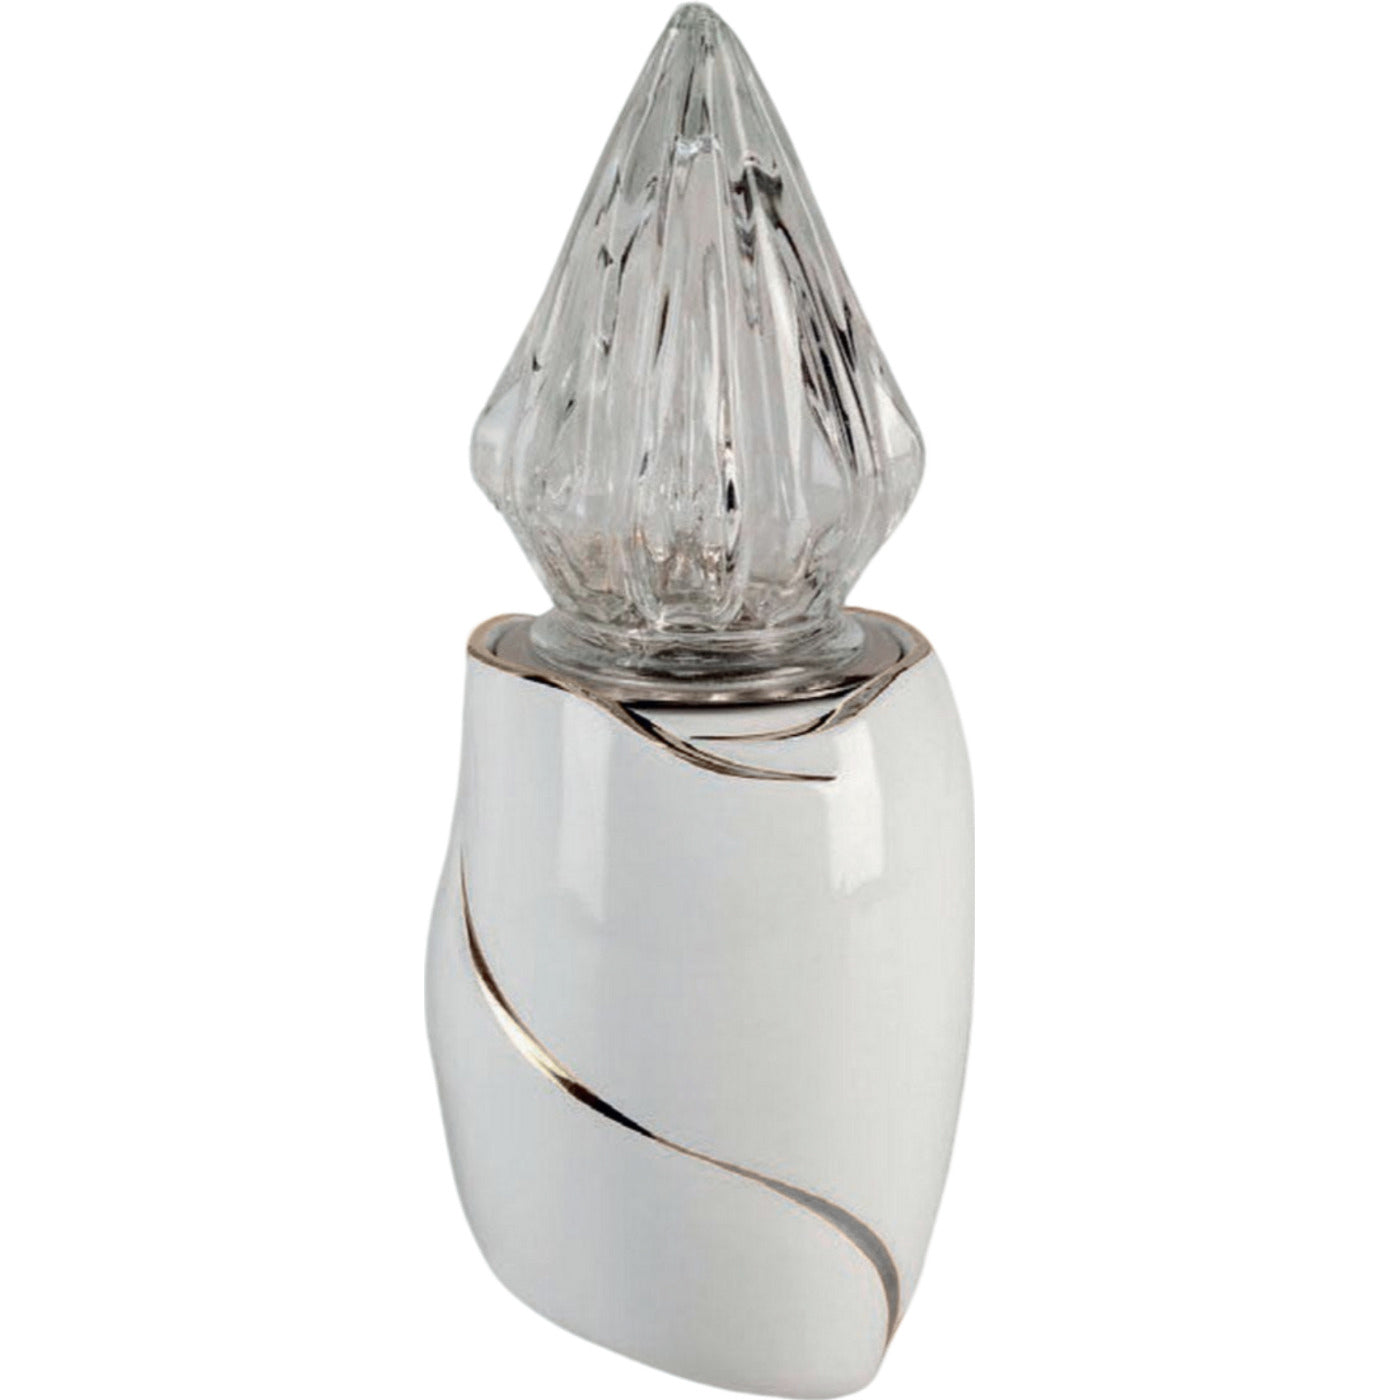 Grave light Why platinum 10x10cm - 3.9x3.9in In white porcelain with platinum decoration, wall attached WHY158P/PLT